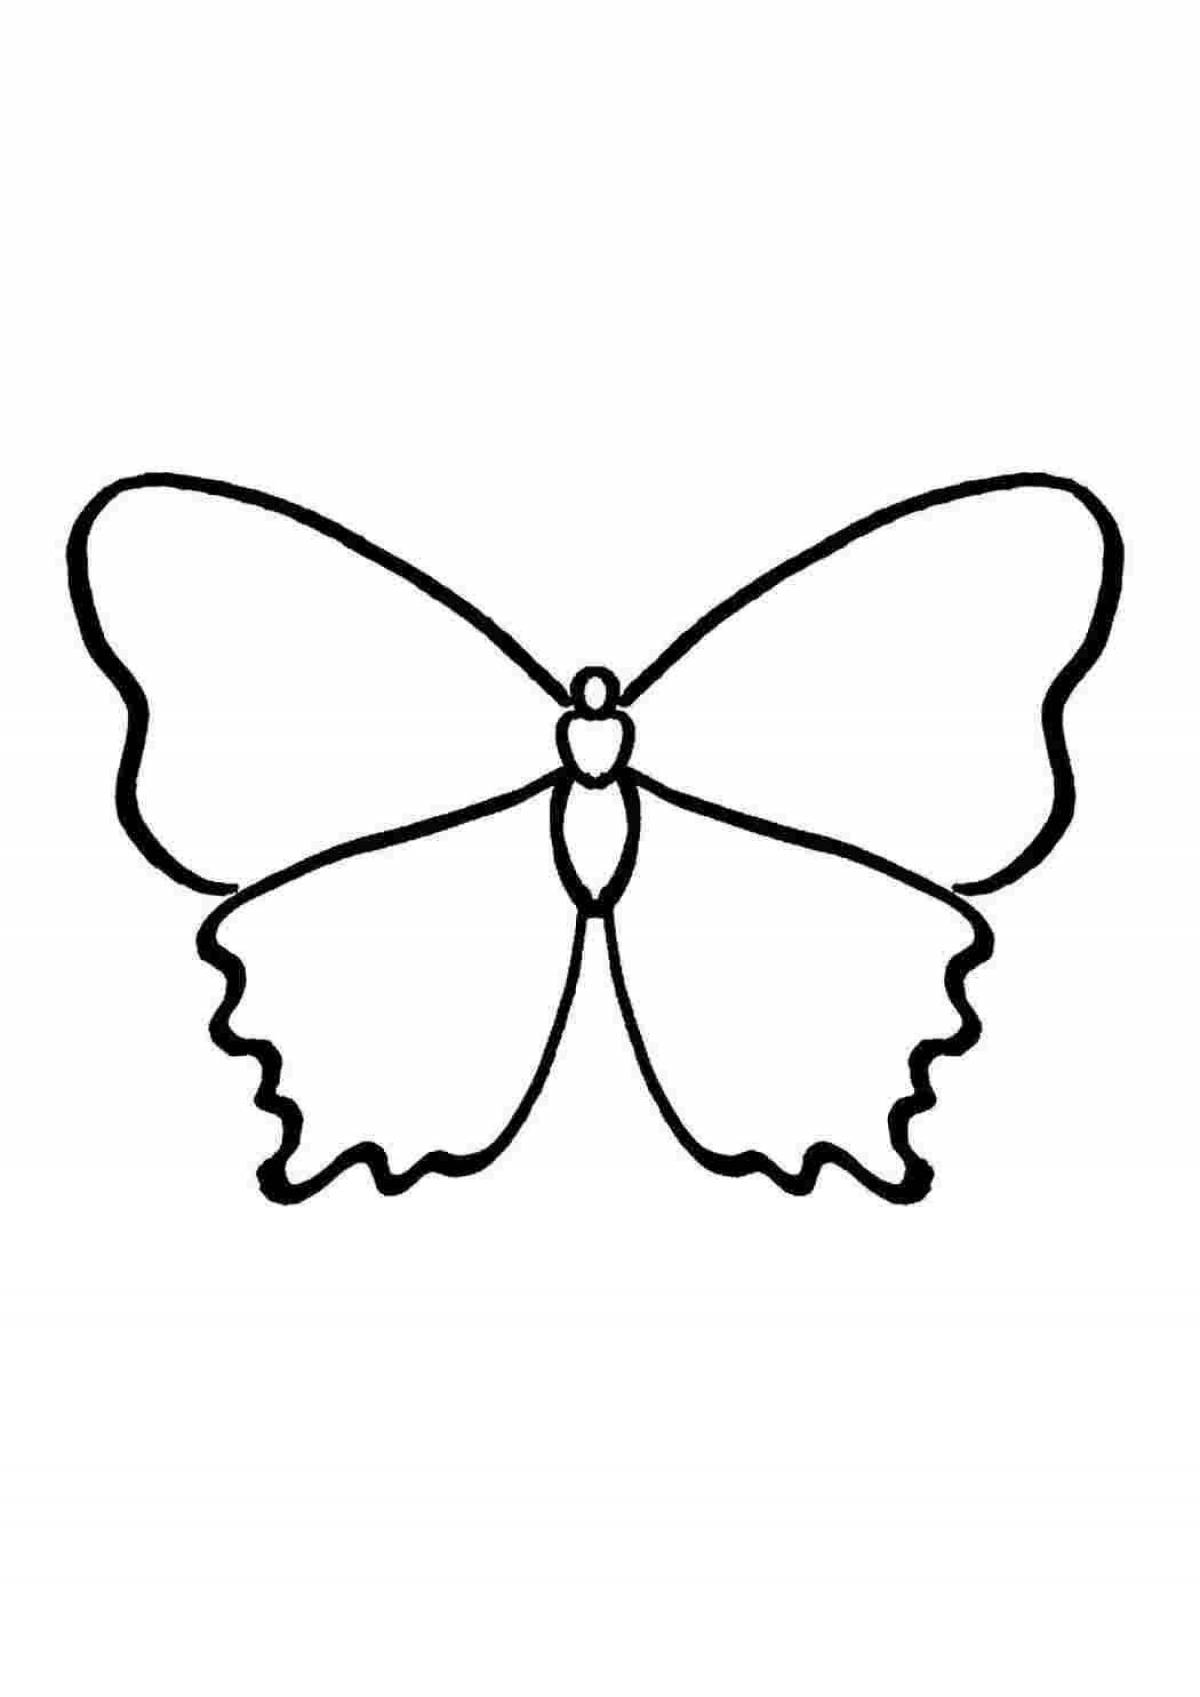 Exciting butterfly coloring book